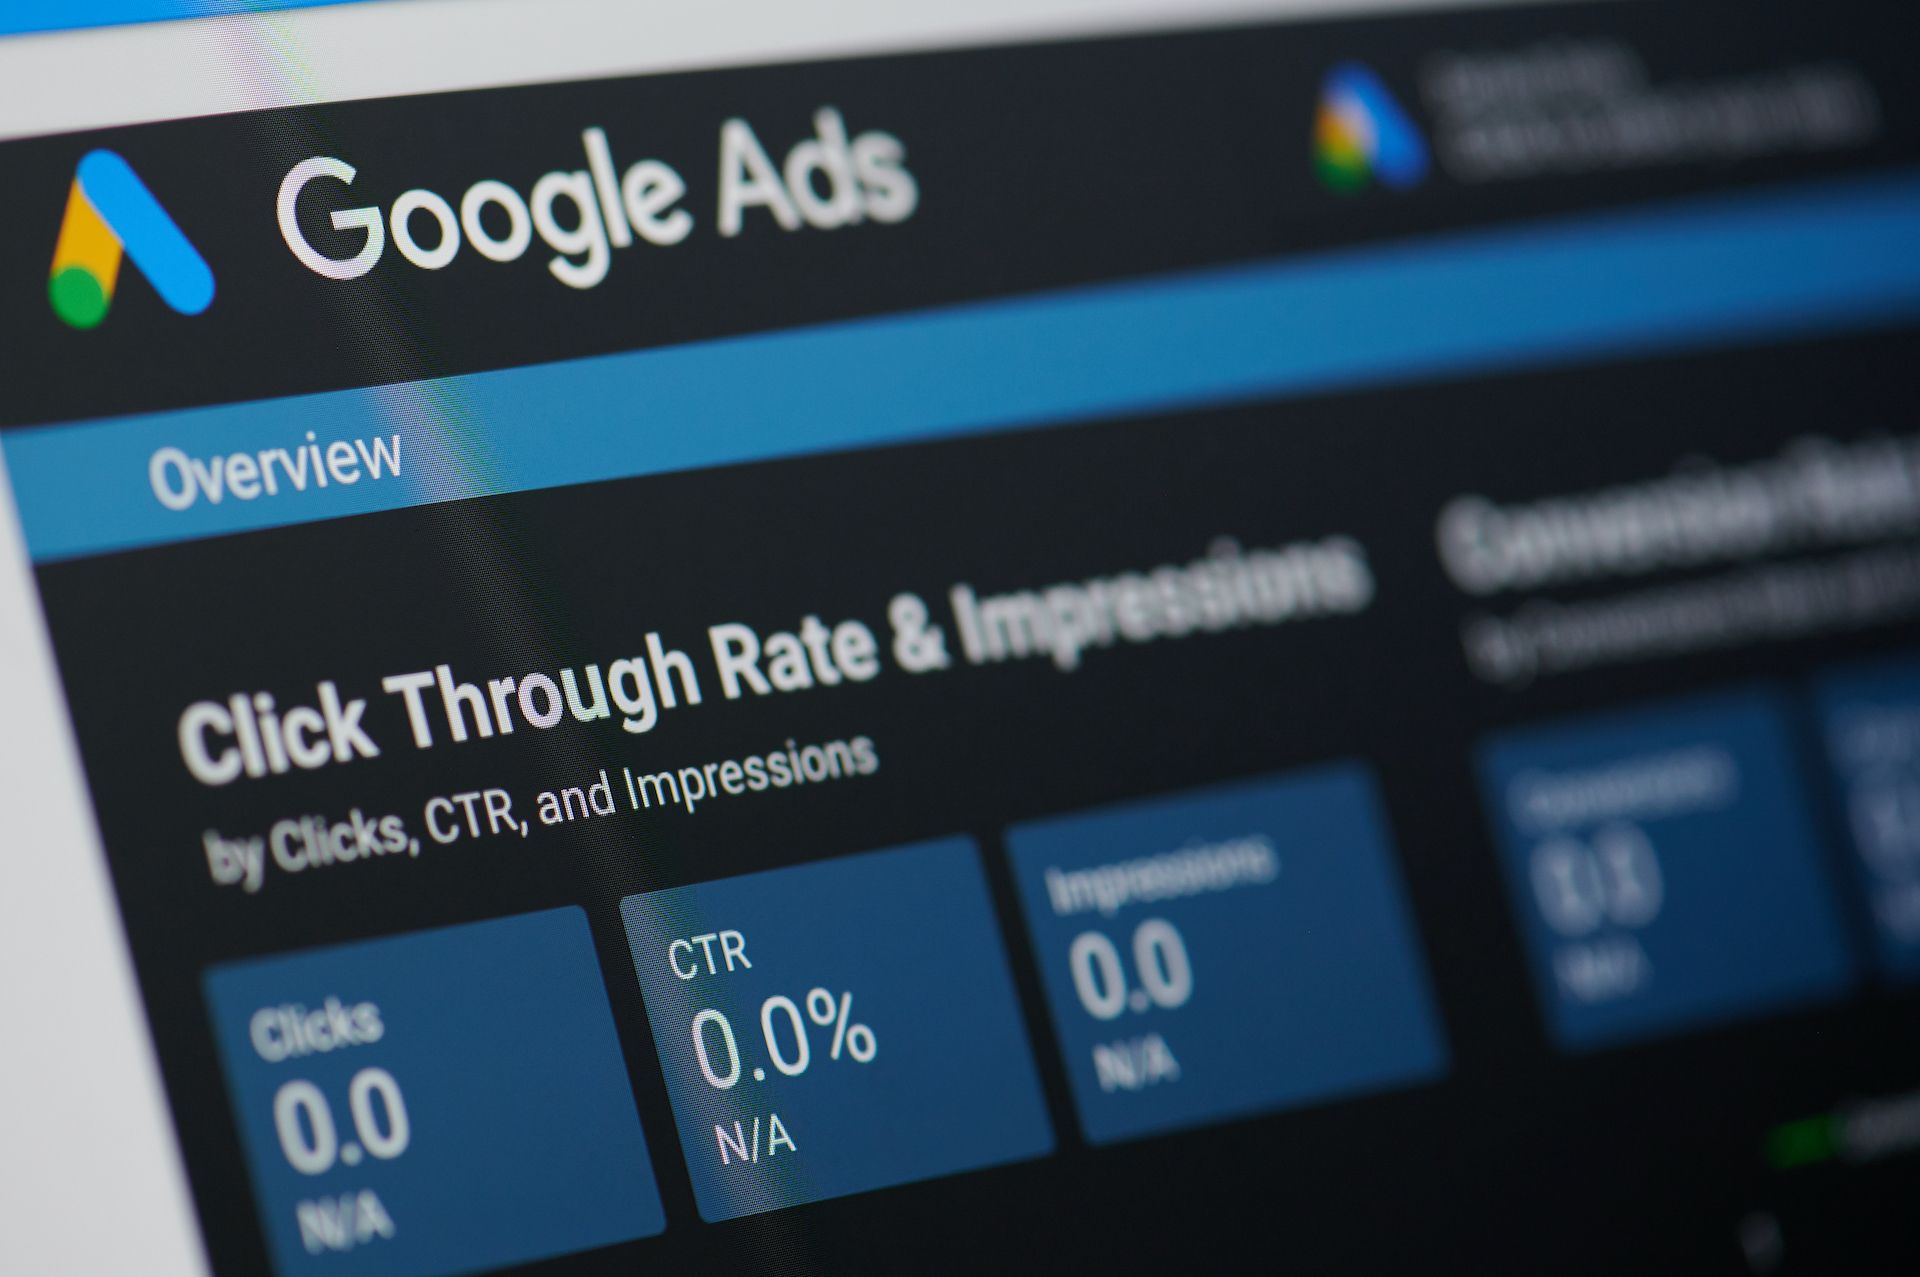 Google Ads dashboard showing metrics like click through rate and impressions